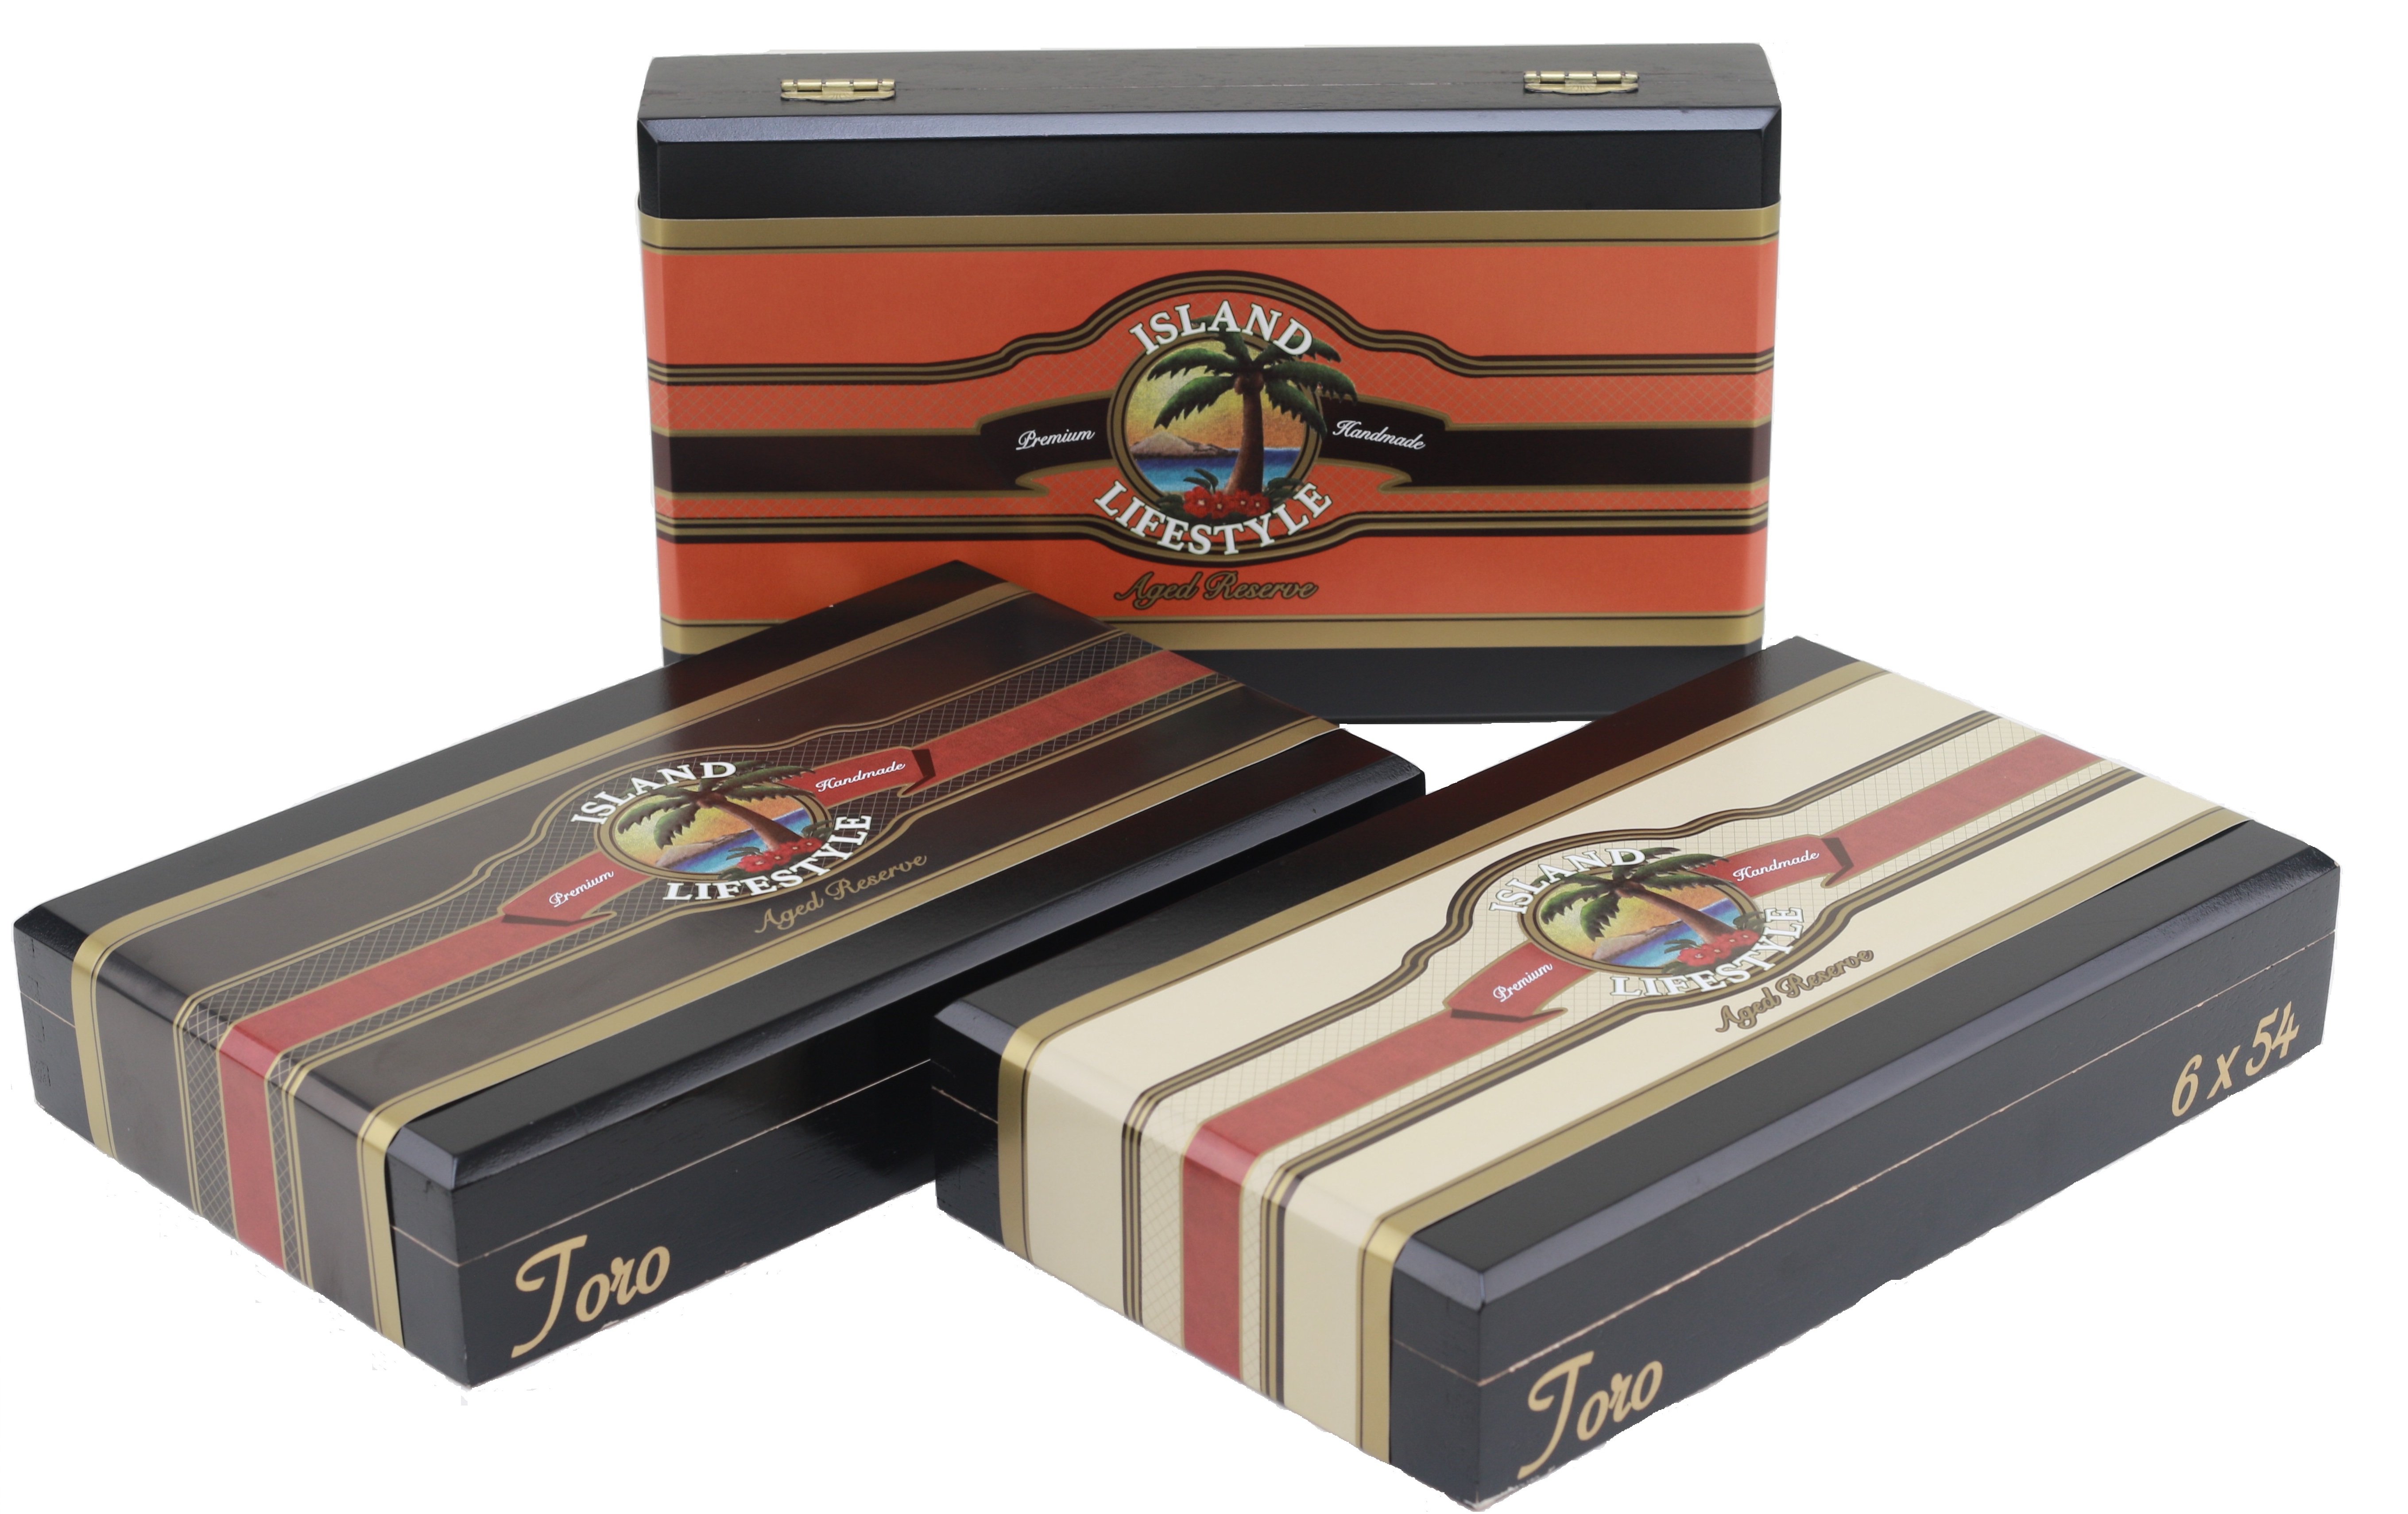 Island Lifestyle Aged Reserve Boxes